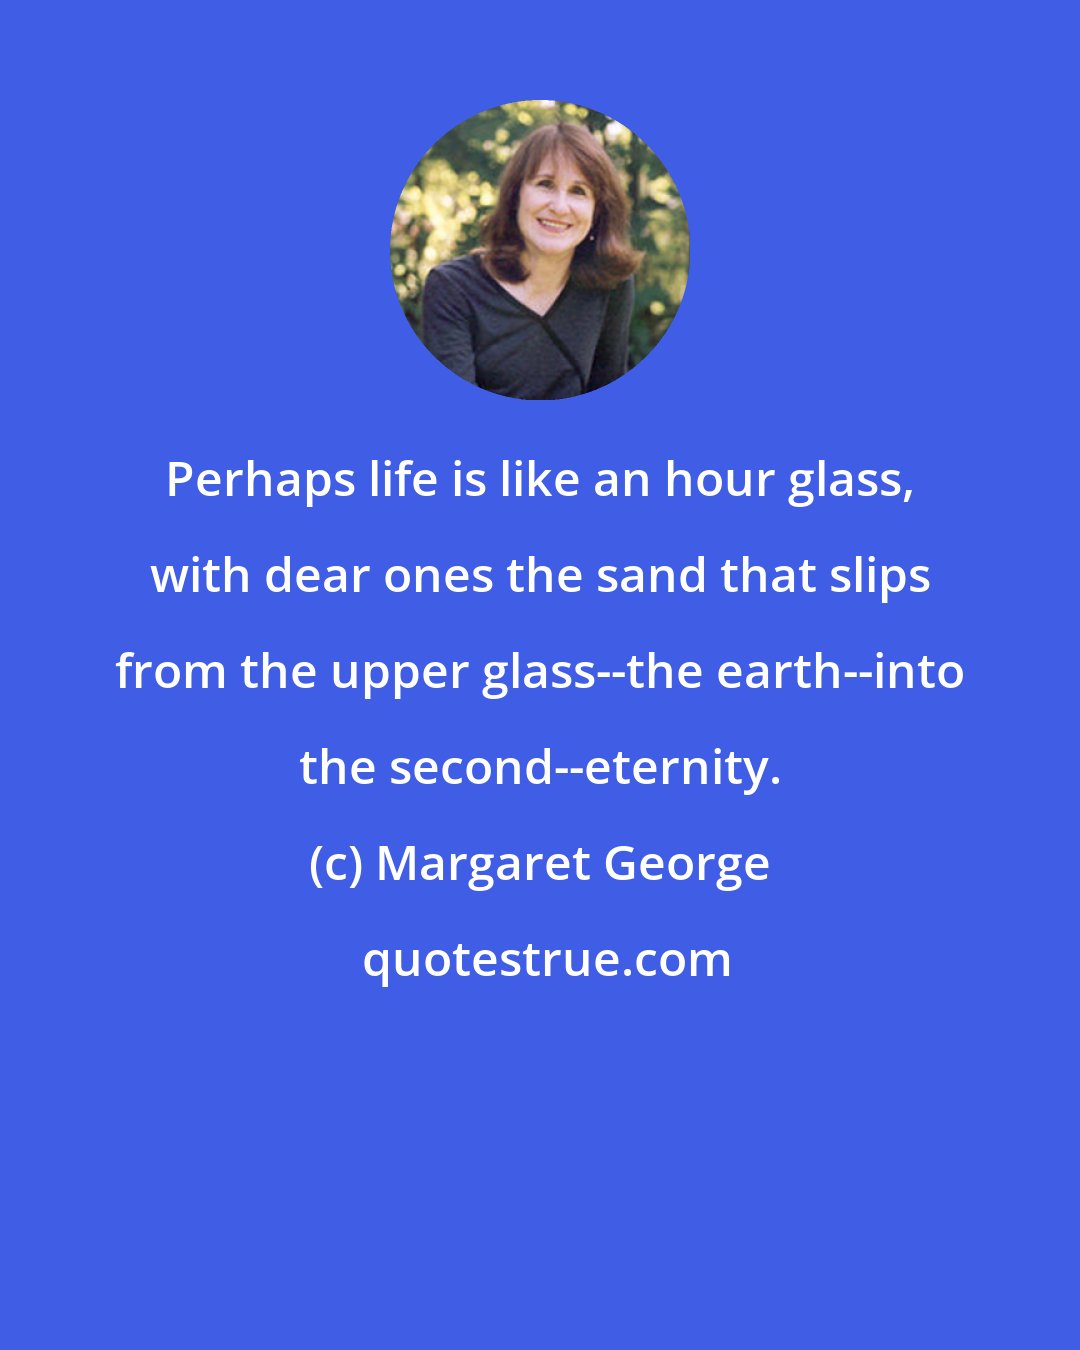 Margaret George: Perhaps life is like an hour glass, with dear ones the sand that slips from the upper glass--the earth--into the second--eternity.